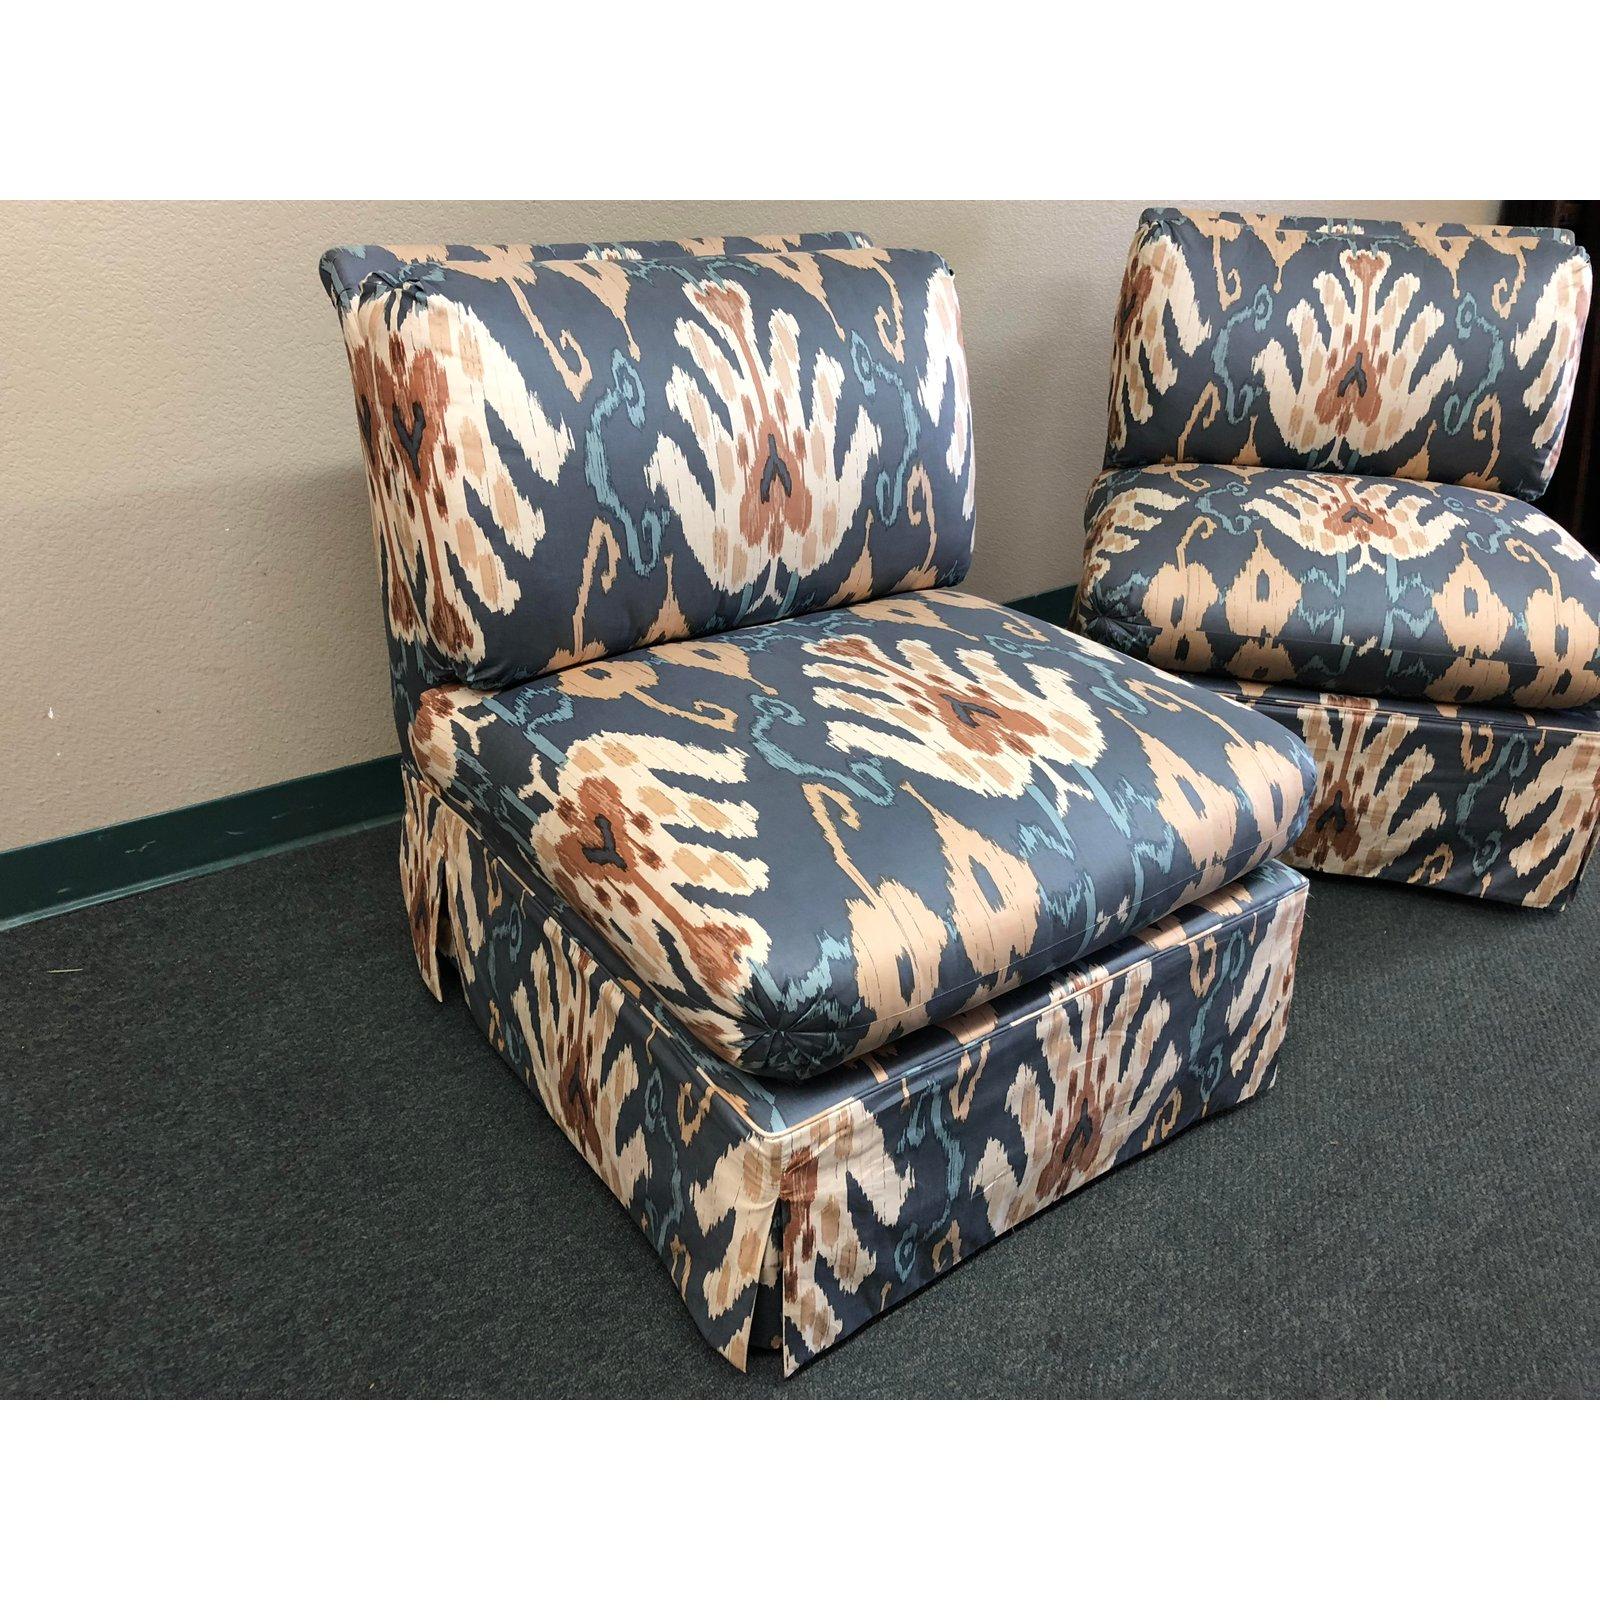 Marge Carson Blue and Ivory Ikat Print Club Chairs, a Pair In Good Condition For Sale In San Francisco, CA